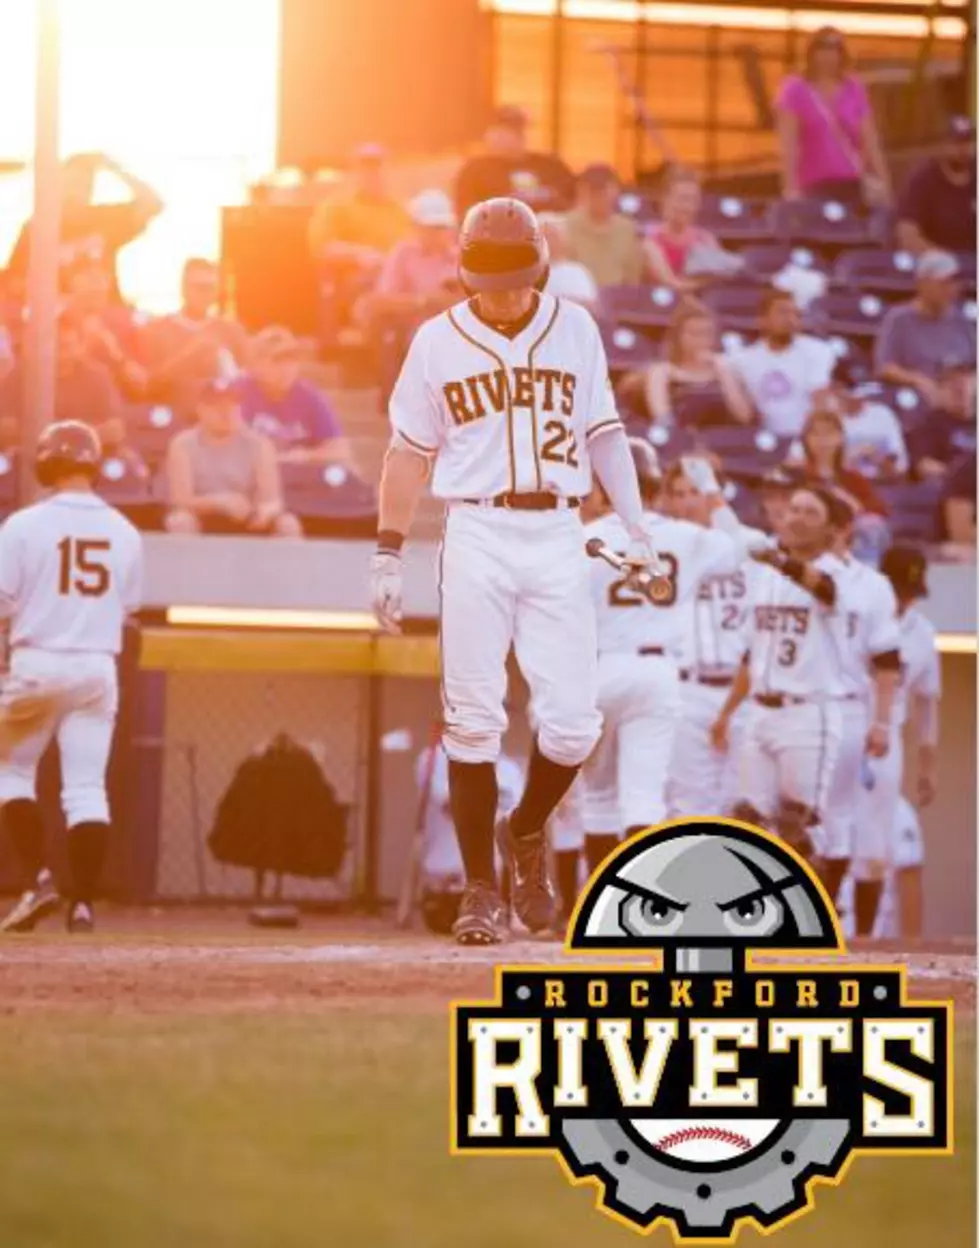 Kids Day with the Rockford Rivets